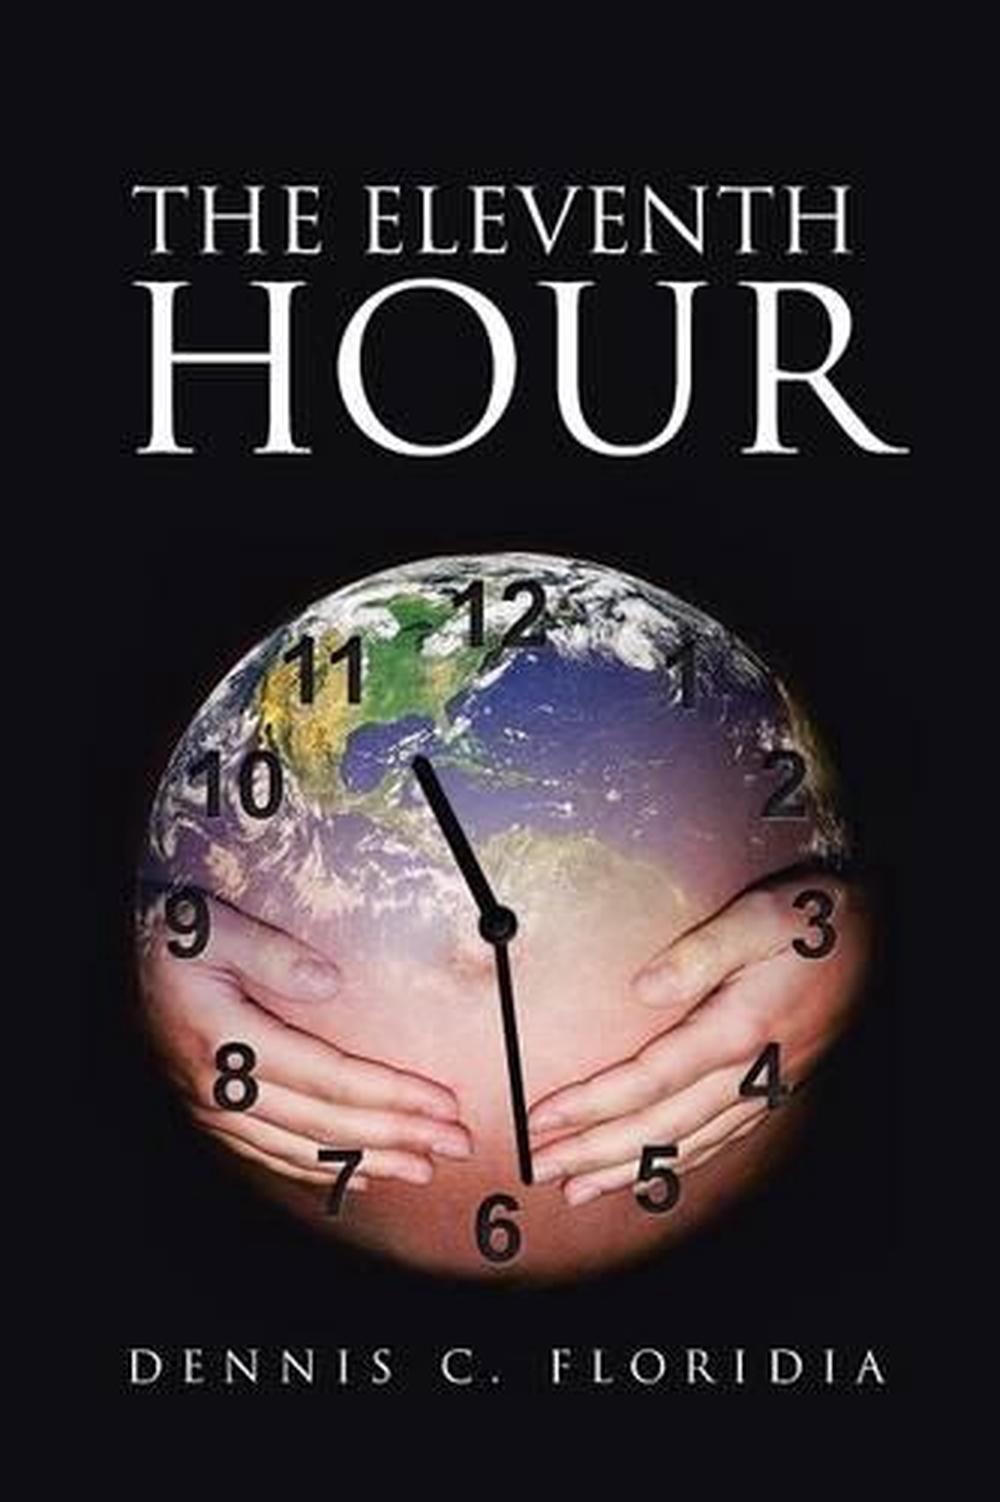 the eleventh hour picture book